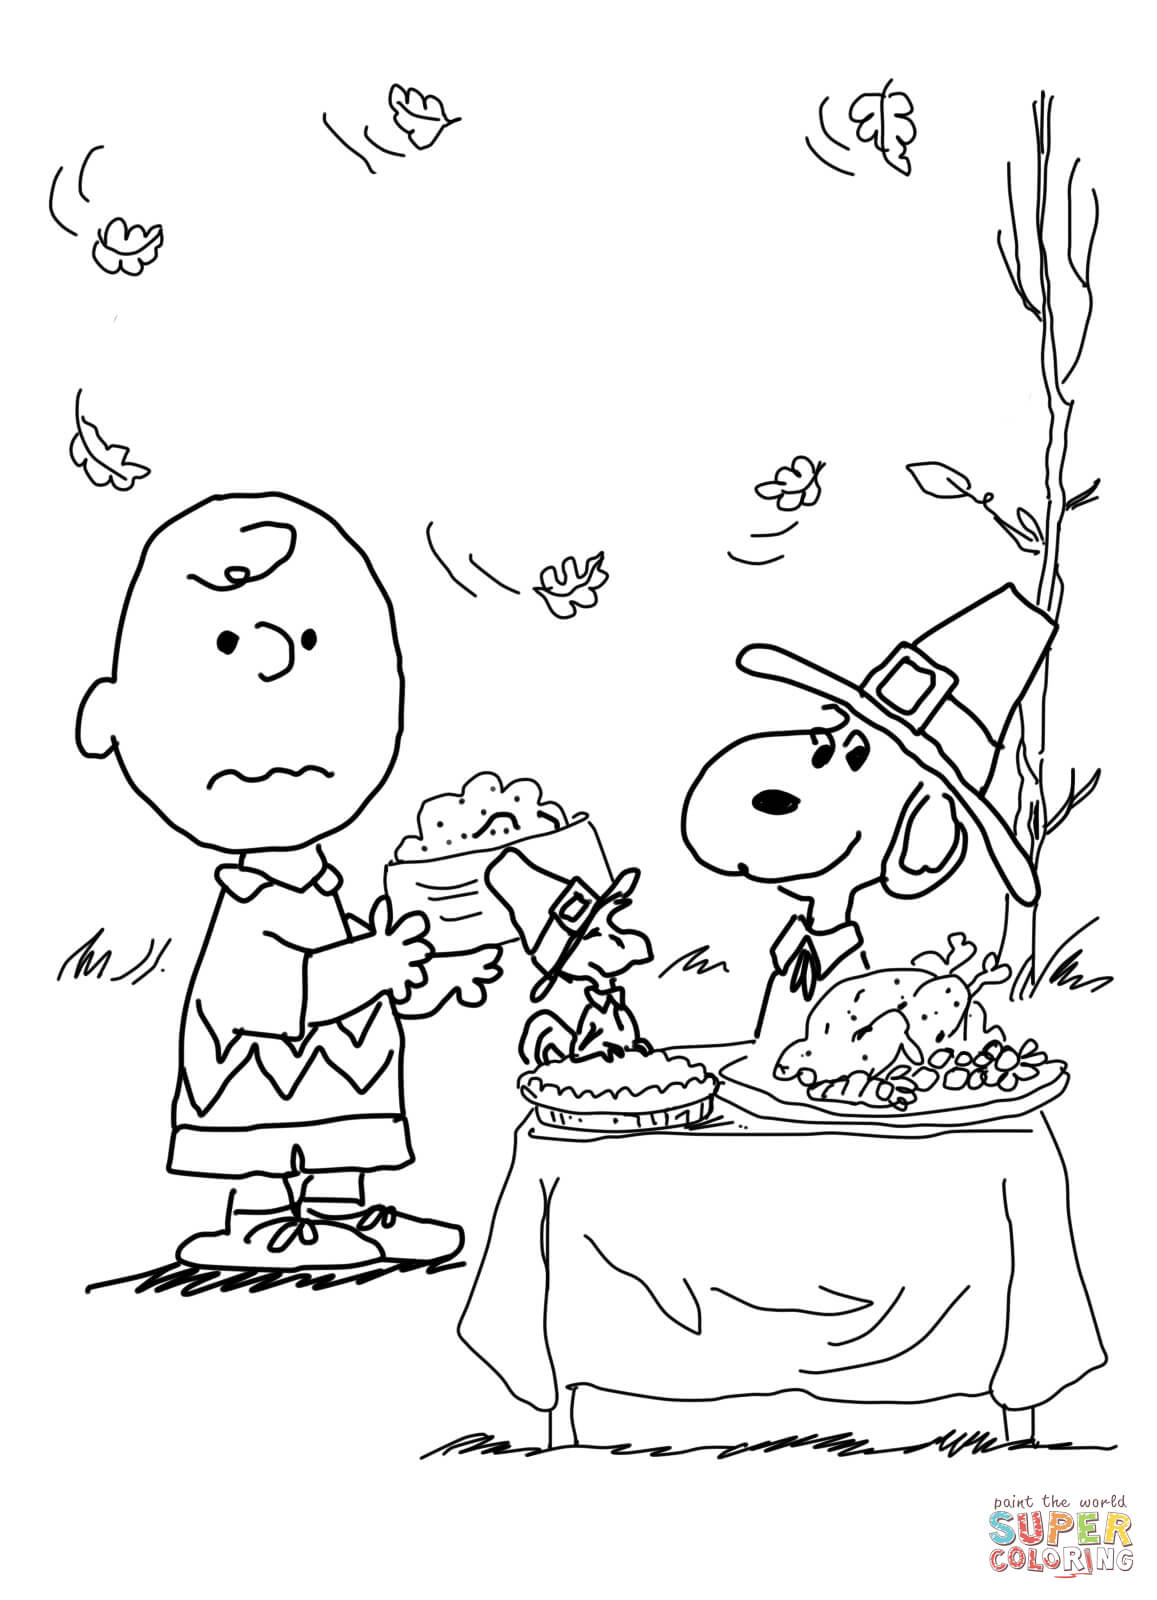 Charlie Brown Thanksgiving Coloring Page | Free Printable Coloring Pages - Free Printable Thanksgiving Coloring Pages